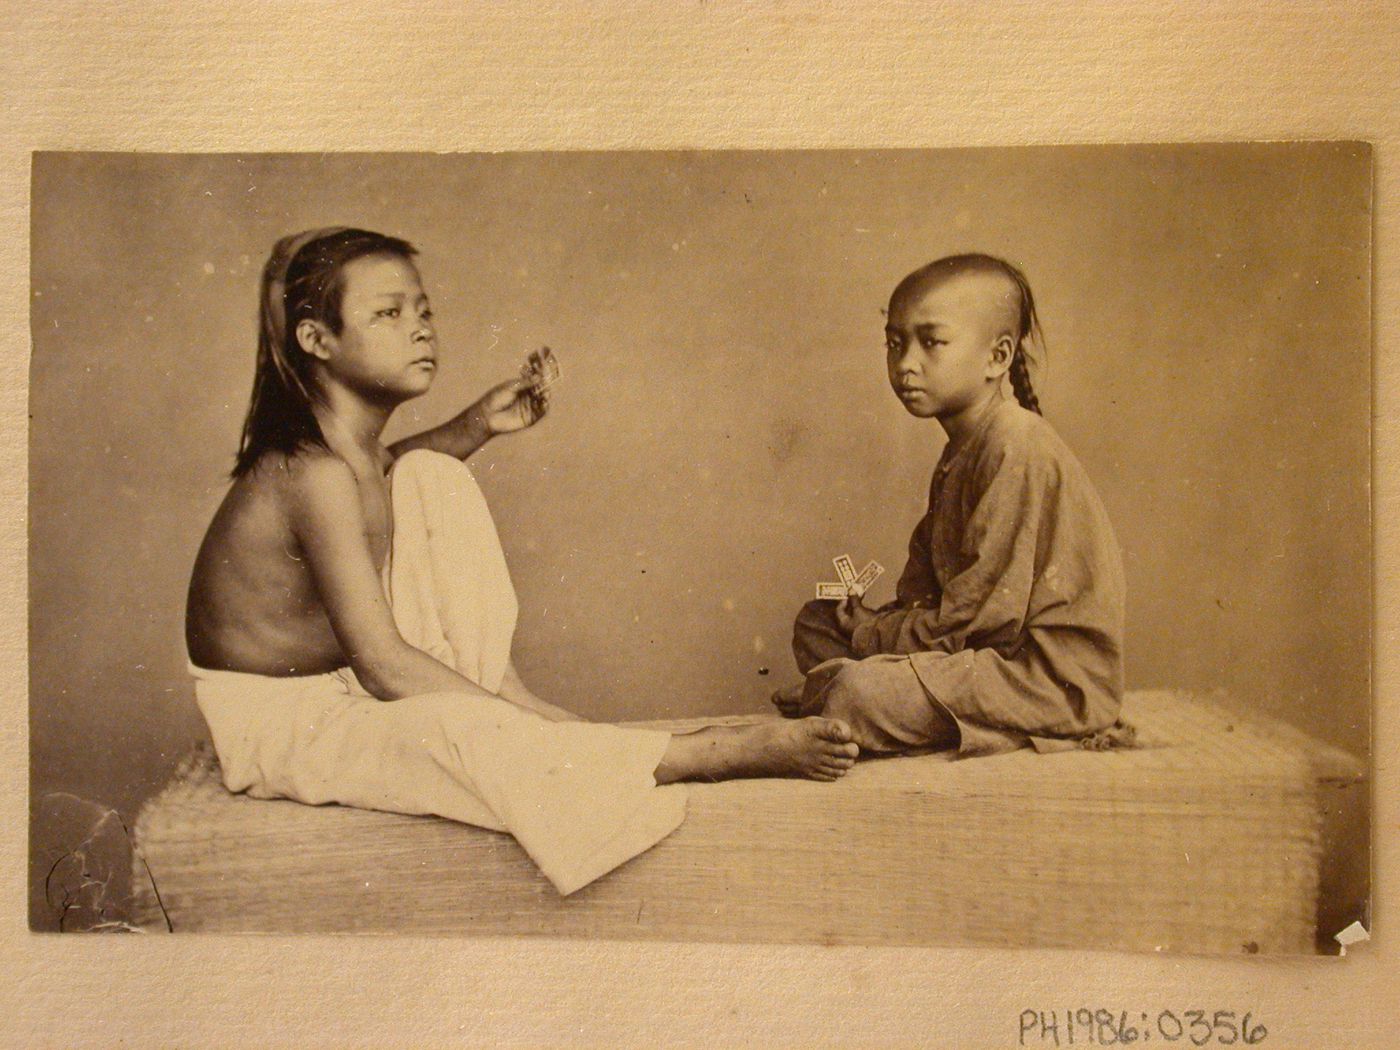 Group portrait of two boys with playing cards, probably in Cochin China (now in Vietnam)